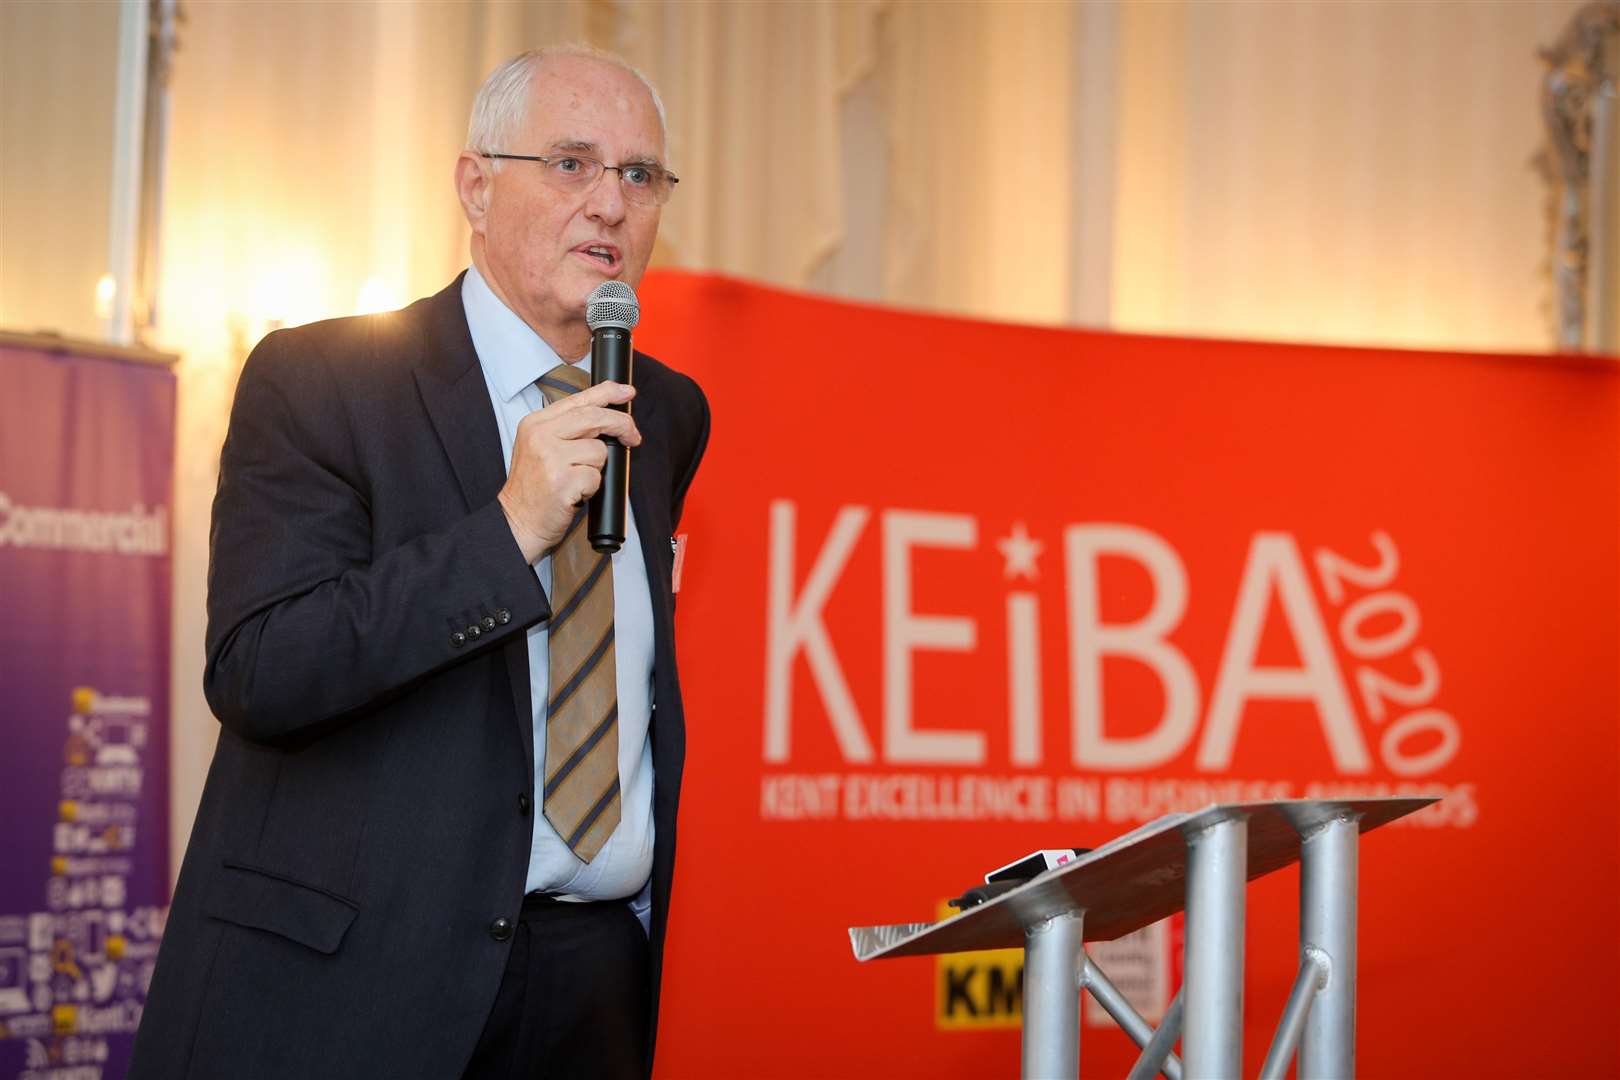 Chairman of the KEiBA judges at this year's launch event, Geoff Miles